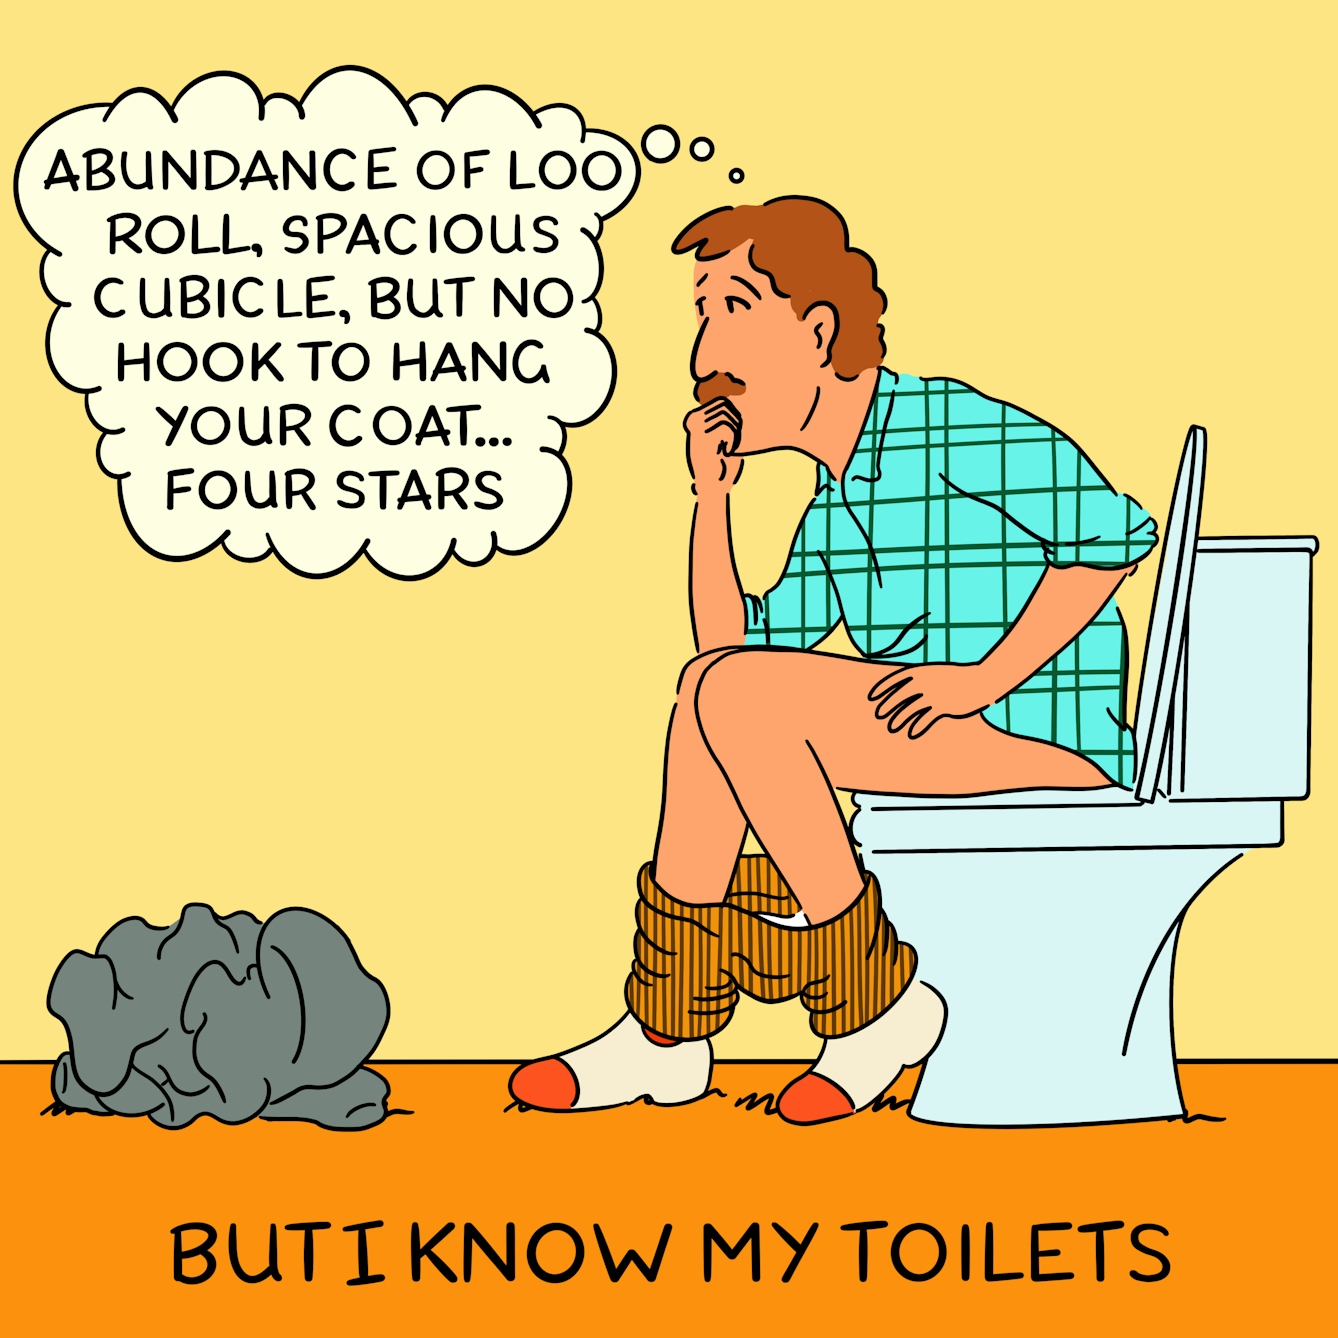 Panel 4 of a four-panel comic drawn digitally: a man with a plaid shirt and corduroy trousers sits on the toilet in the stance of Rodin's Thinker (elbow on knee with hand raised to chin and a pensive expression). His coat is crumpled on the floor in front of him. He thinks "Abundance of loo roll, spacious cubicle, but no hook to hang your coat... four stars"
The caption text reads "But I know my toilets"